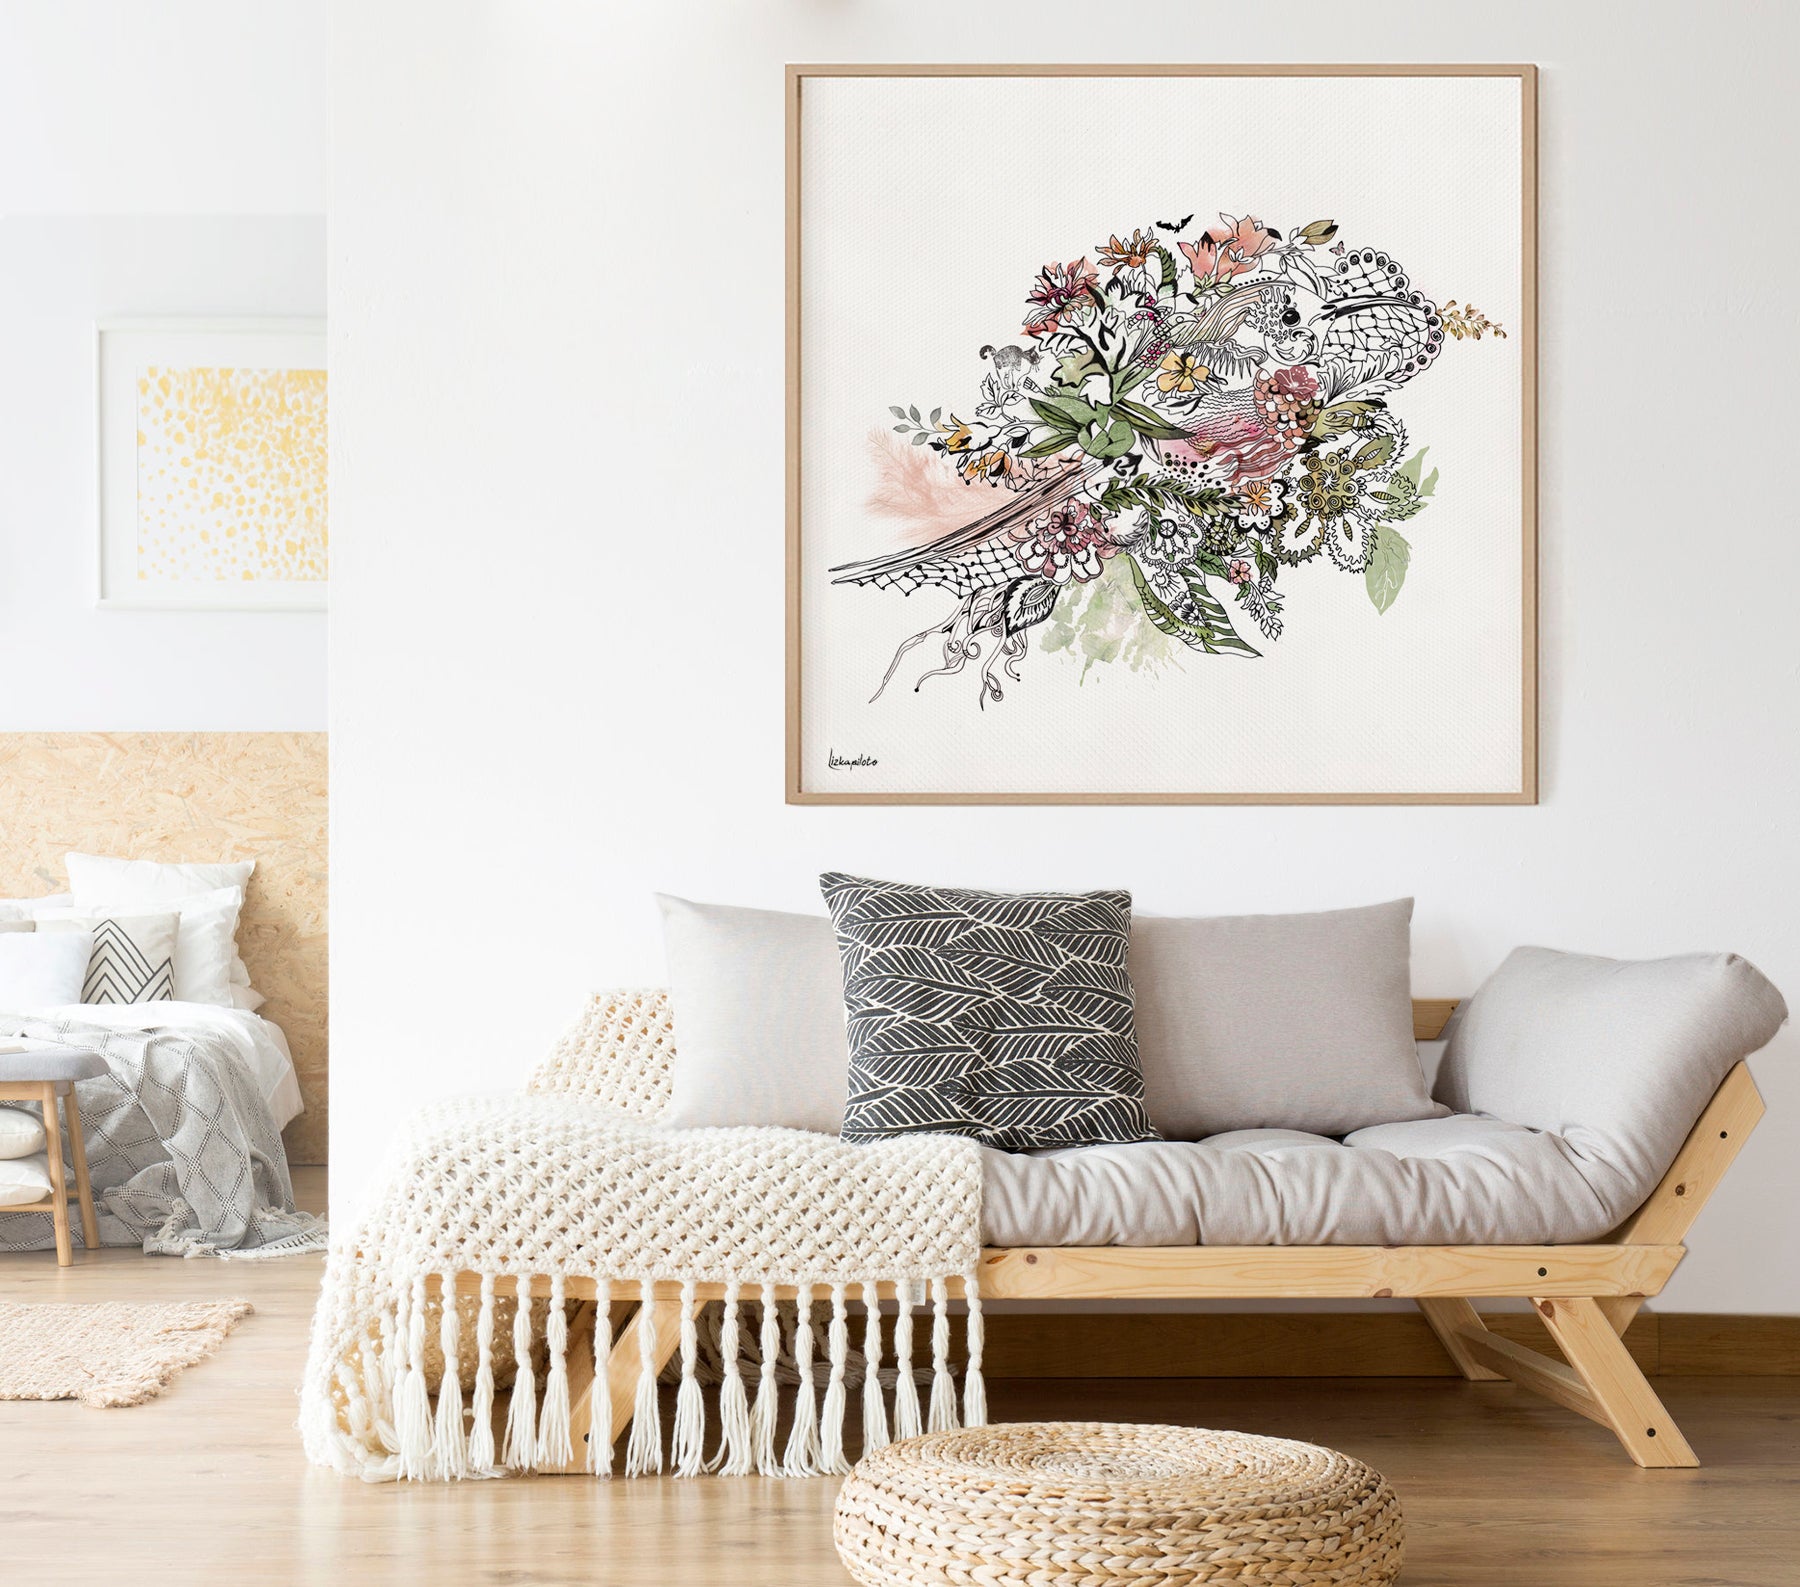 Birds art print framed and hanged above a sofa